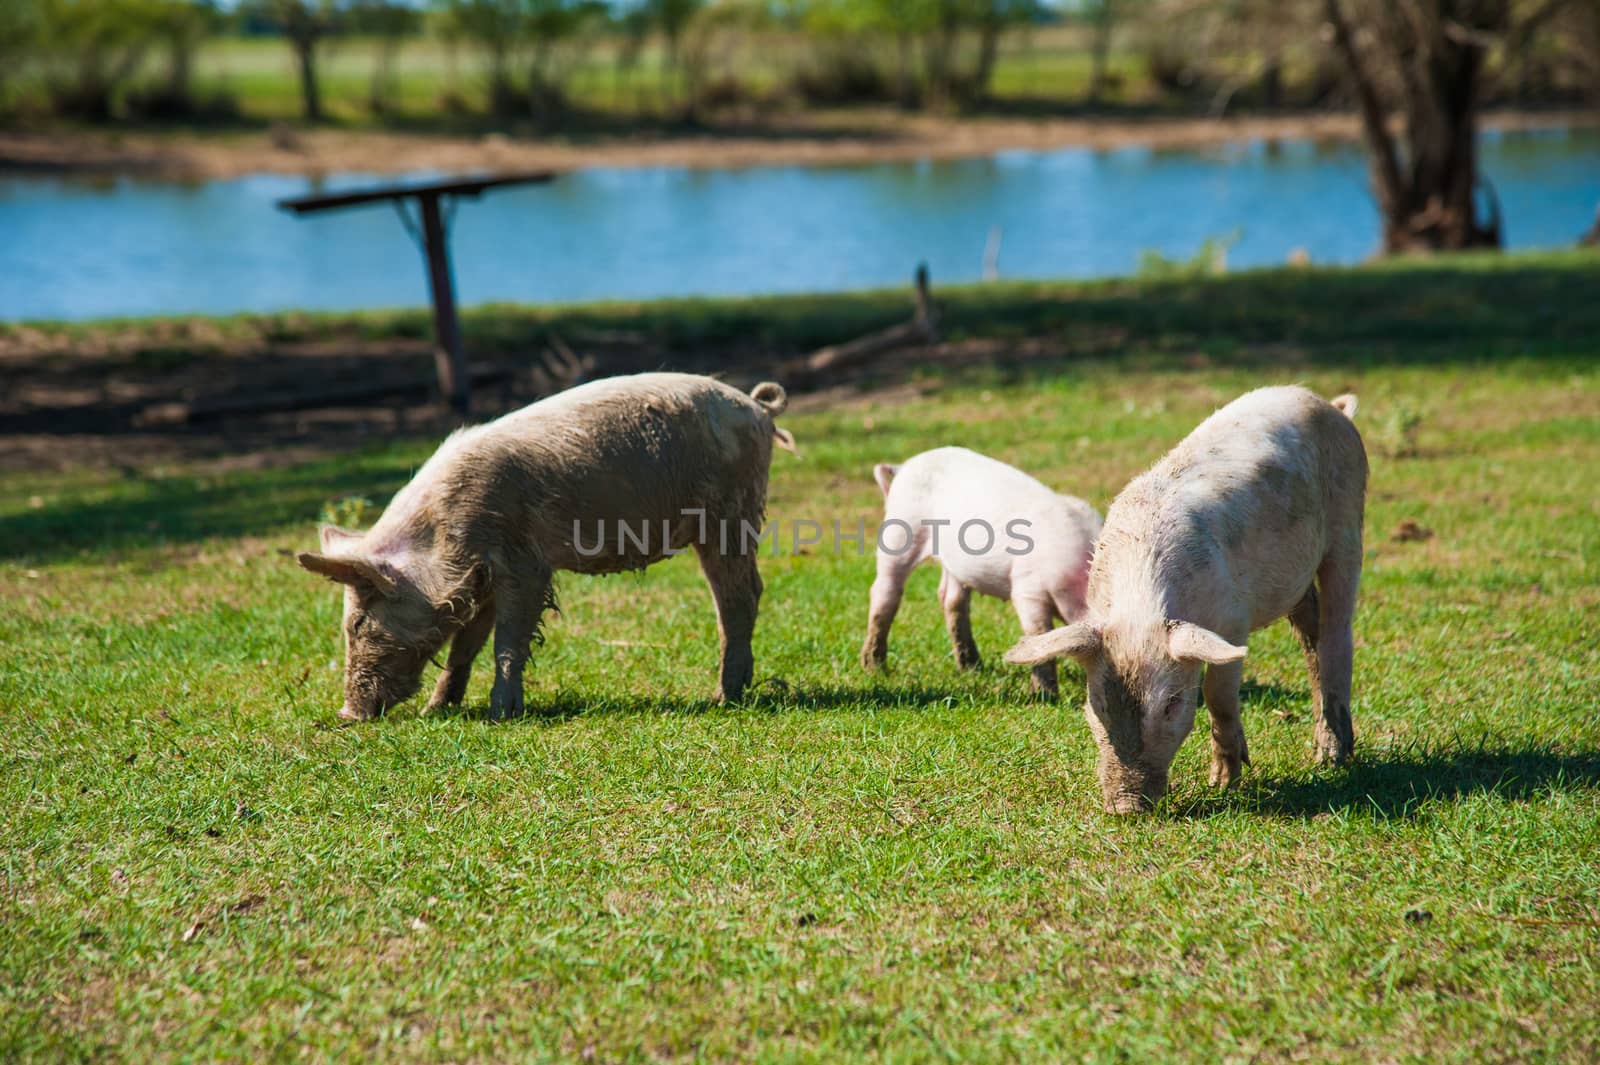 Pig farm. Pigs in field. Pig running on a green meadow